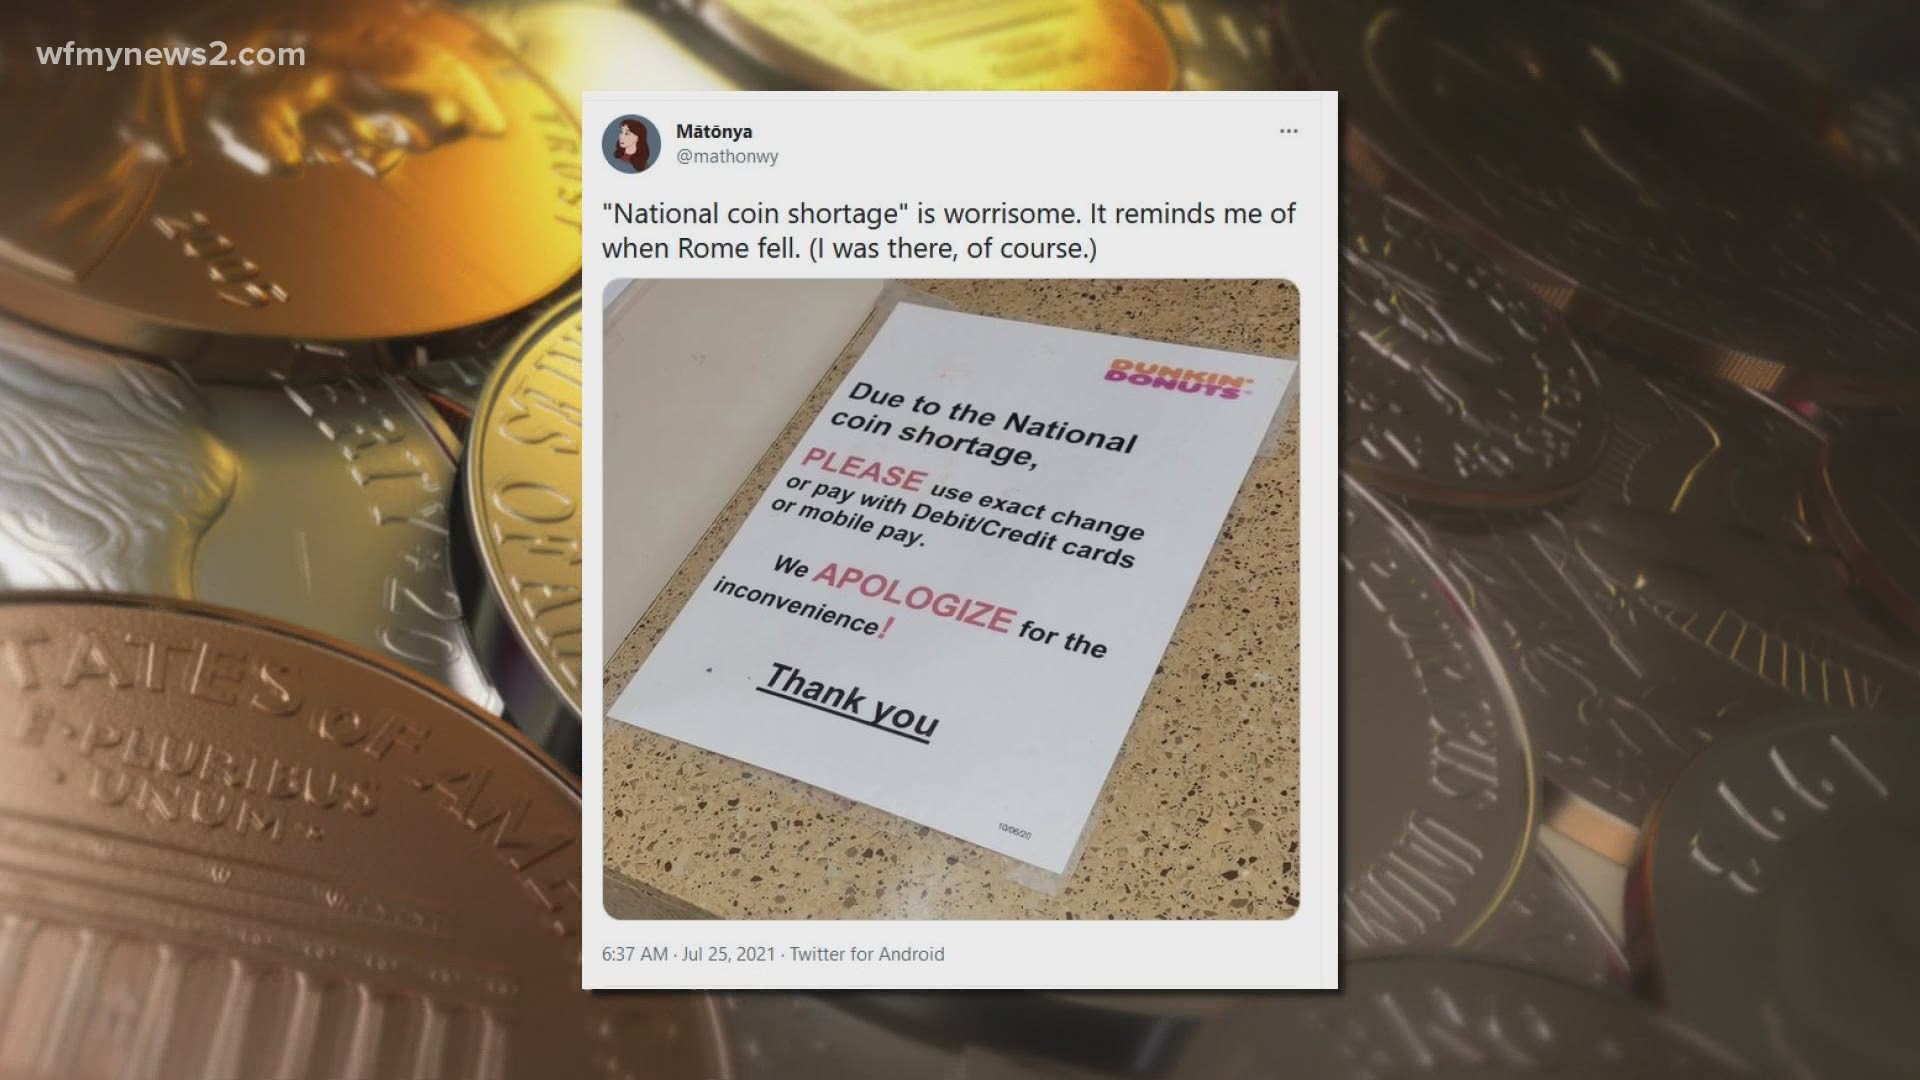 Triad stores are once again asking for exact change due to a national coin circulation issue.